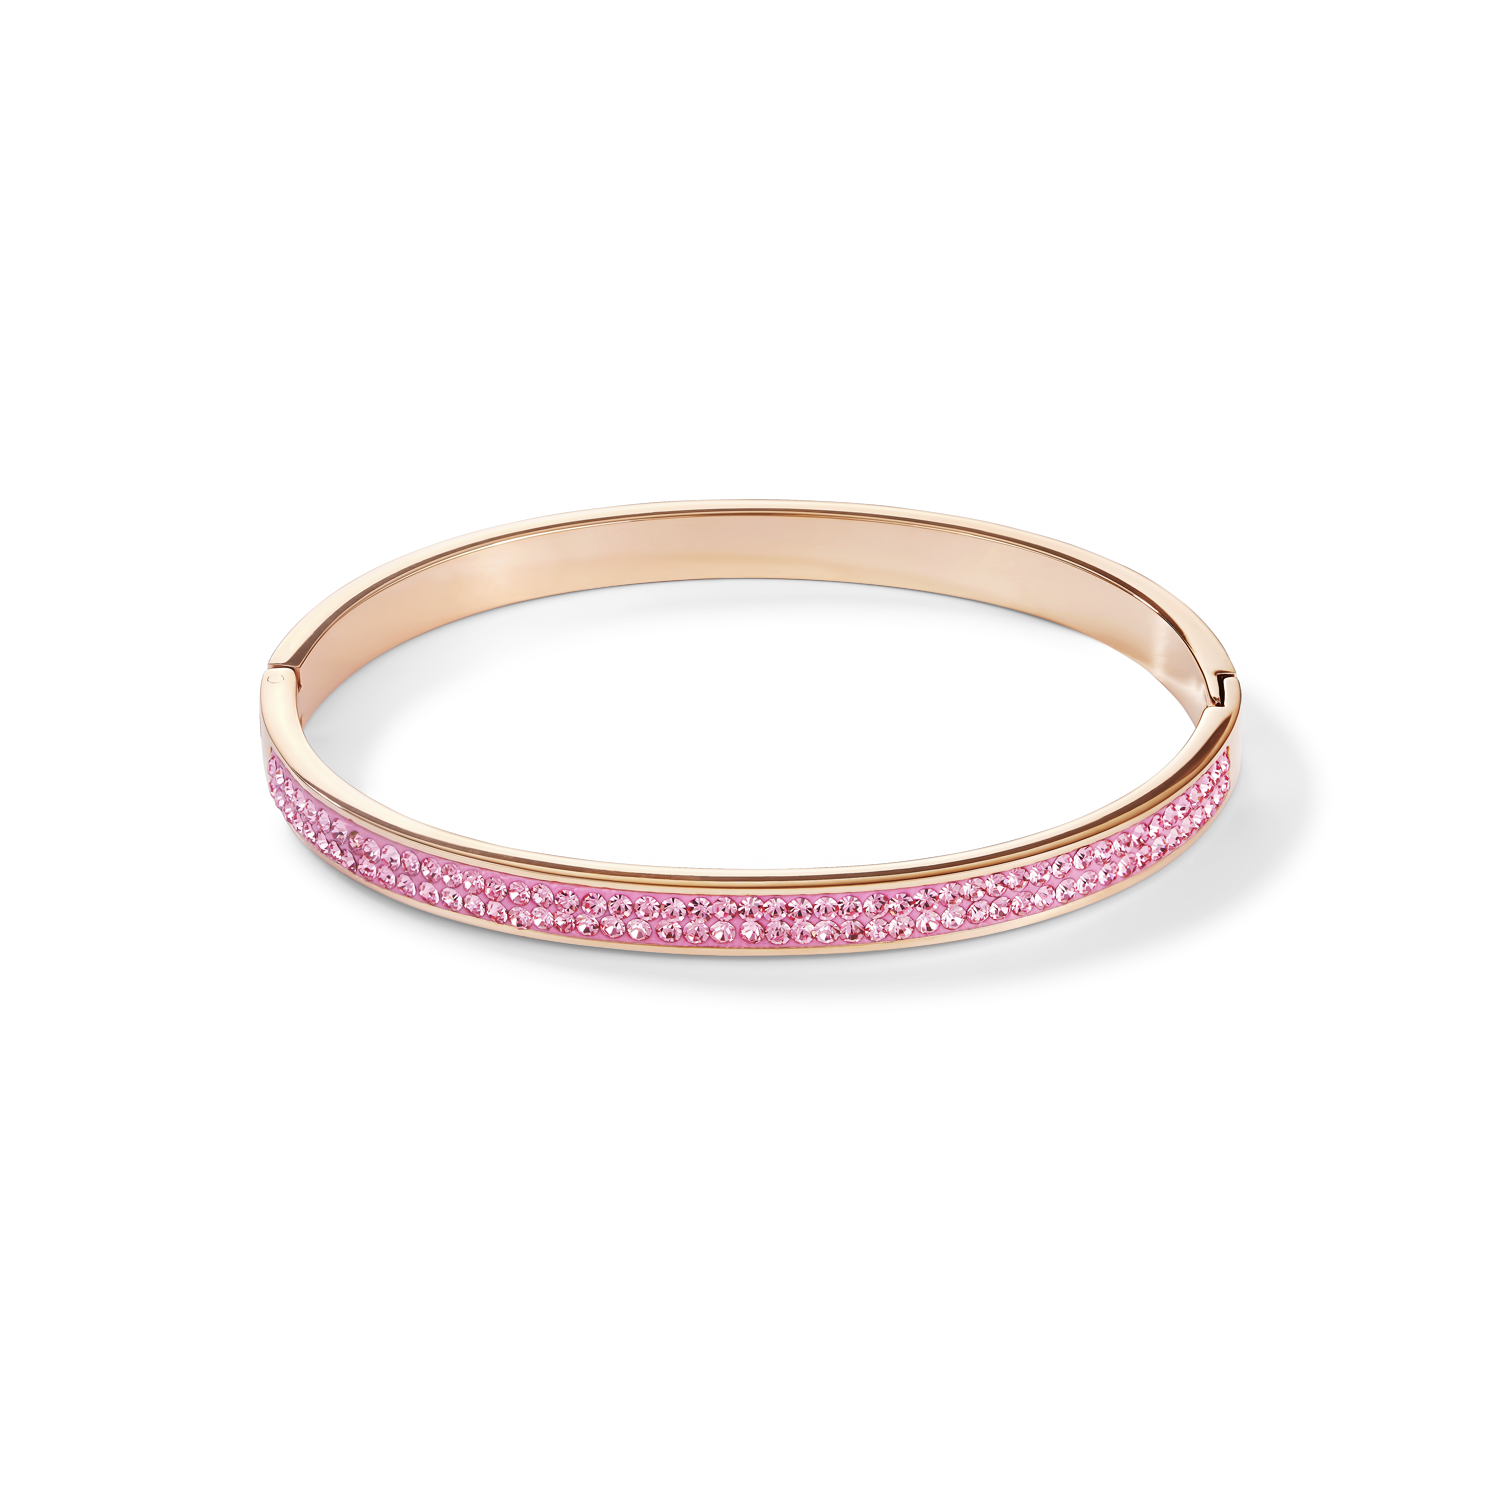 Bangle stainless steel rose gold & crystals pavé light rose